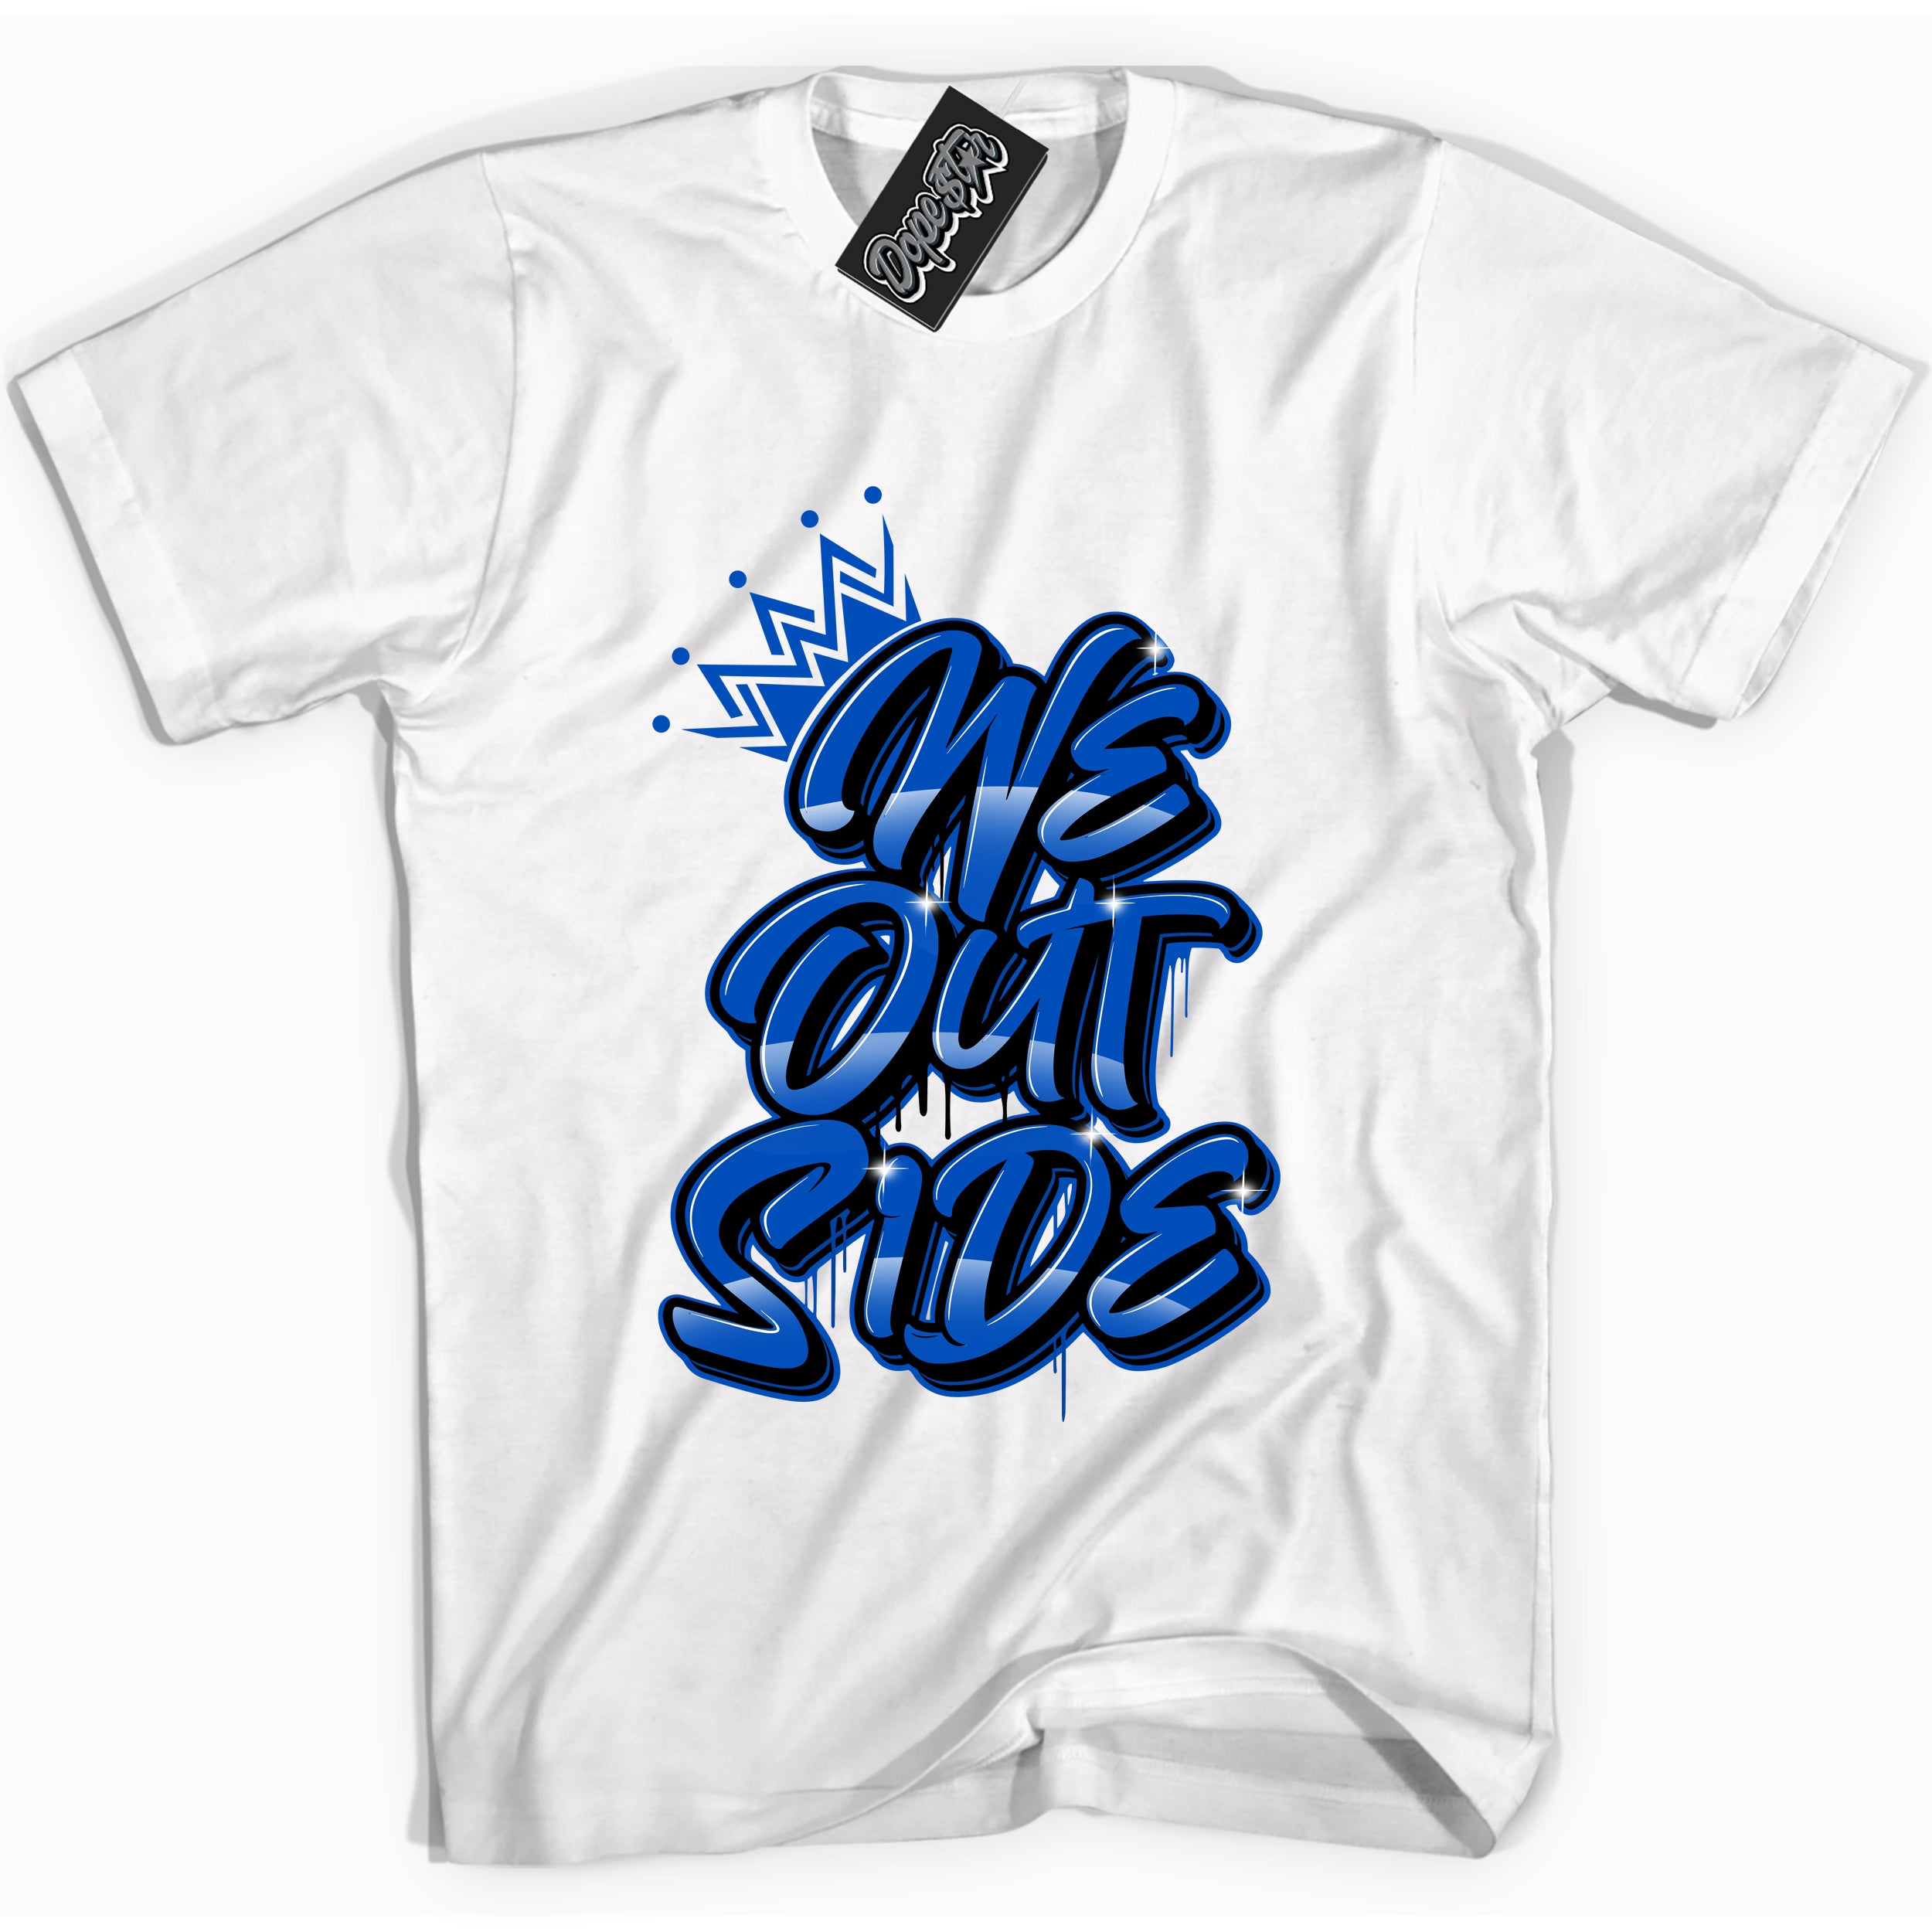 Cool White graphic tee with "We Outside" design, that perfectly matches Royal Reimagined 1s sneakers 